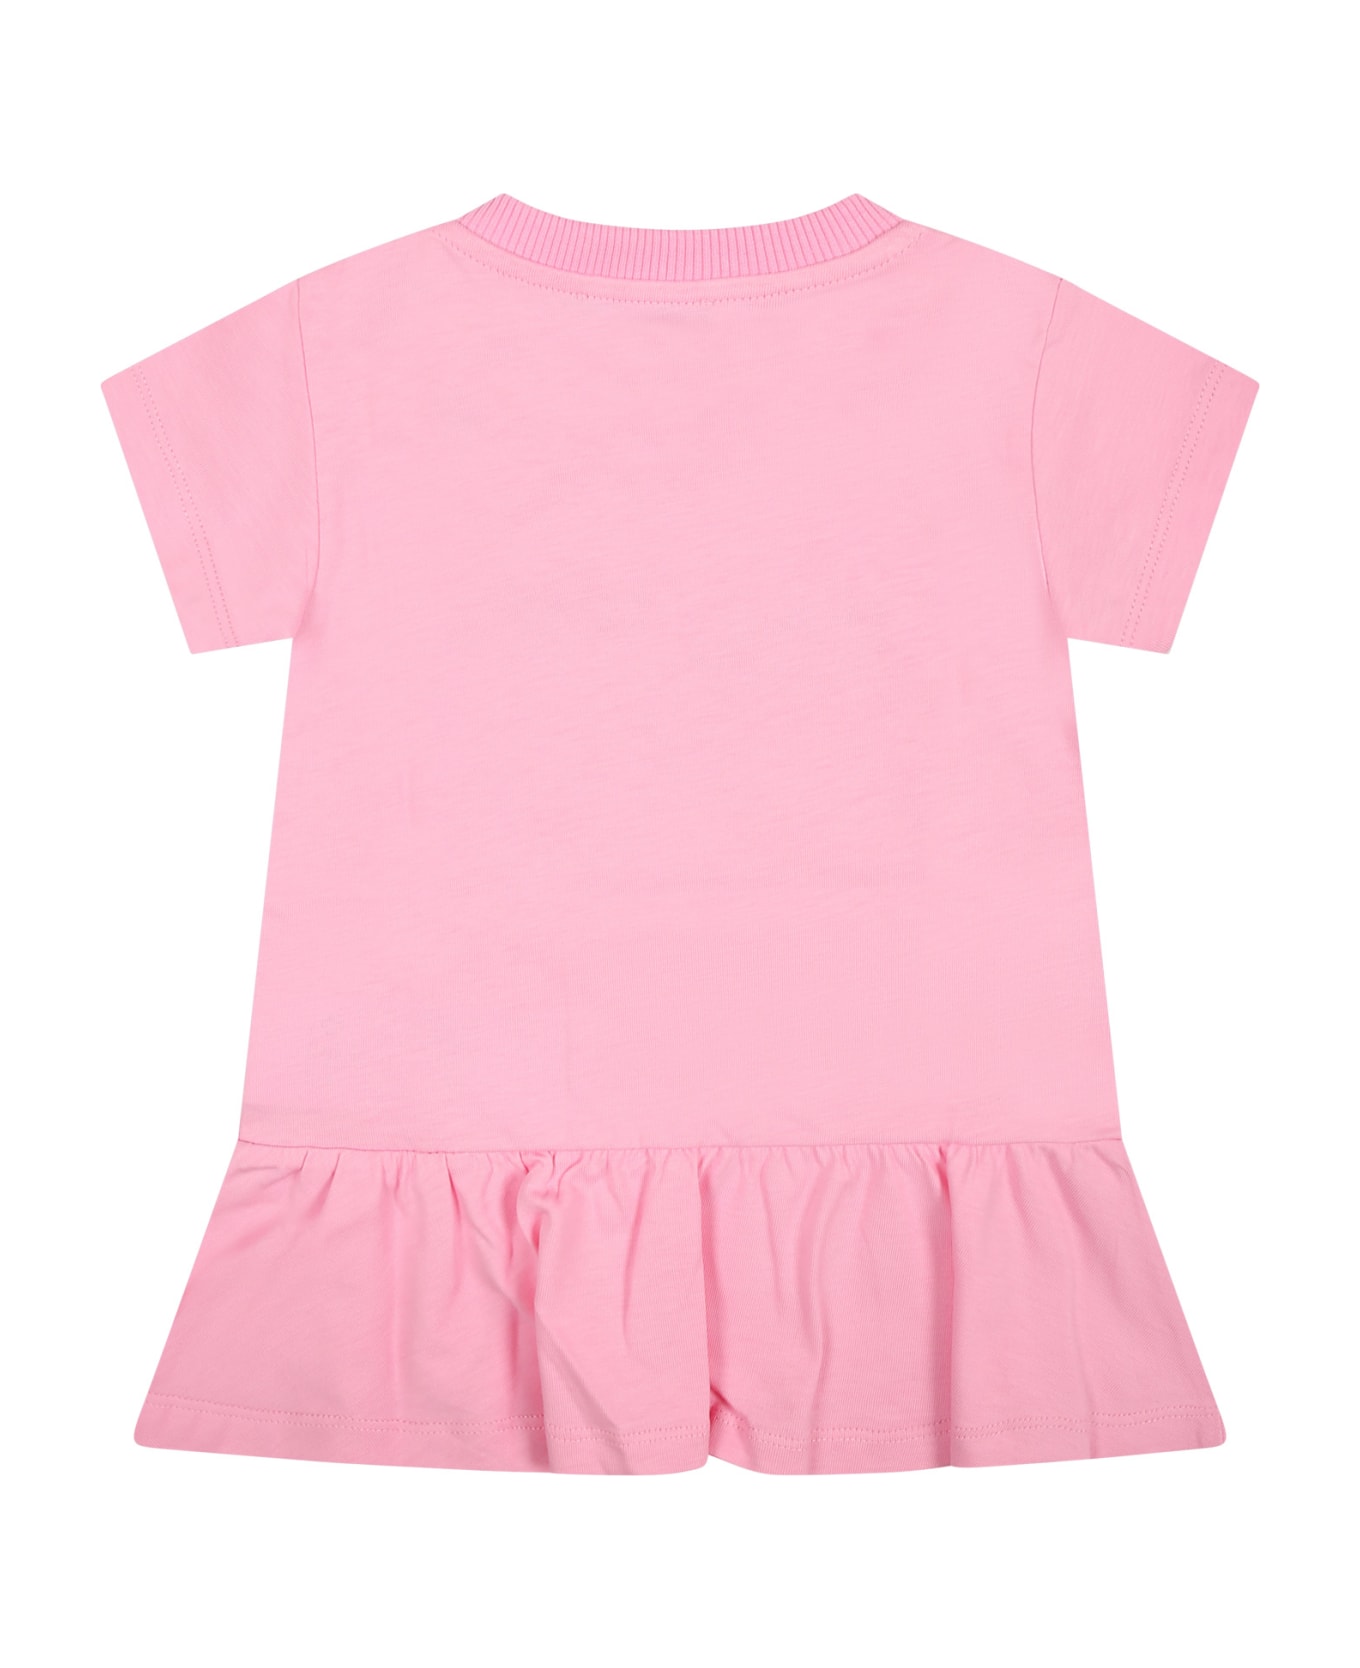 Moschino Pink Dress For Baby Girl With Logo And Animals - Pink ウェア